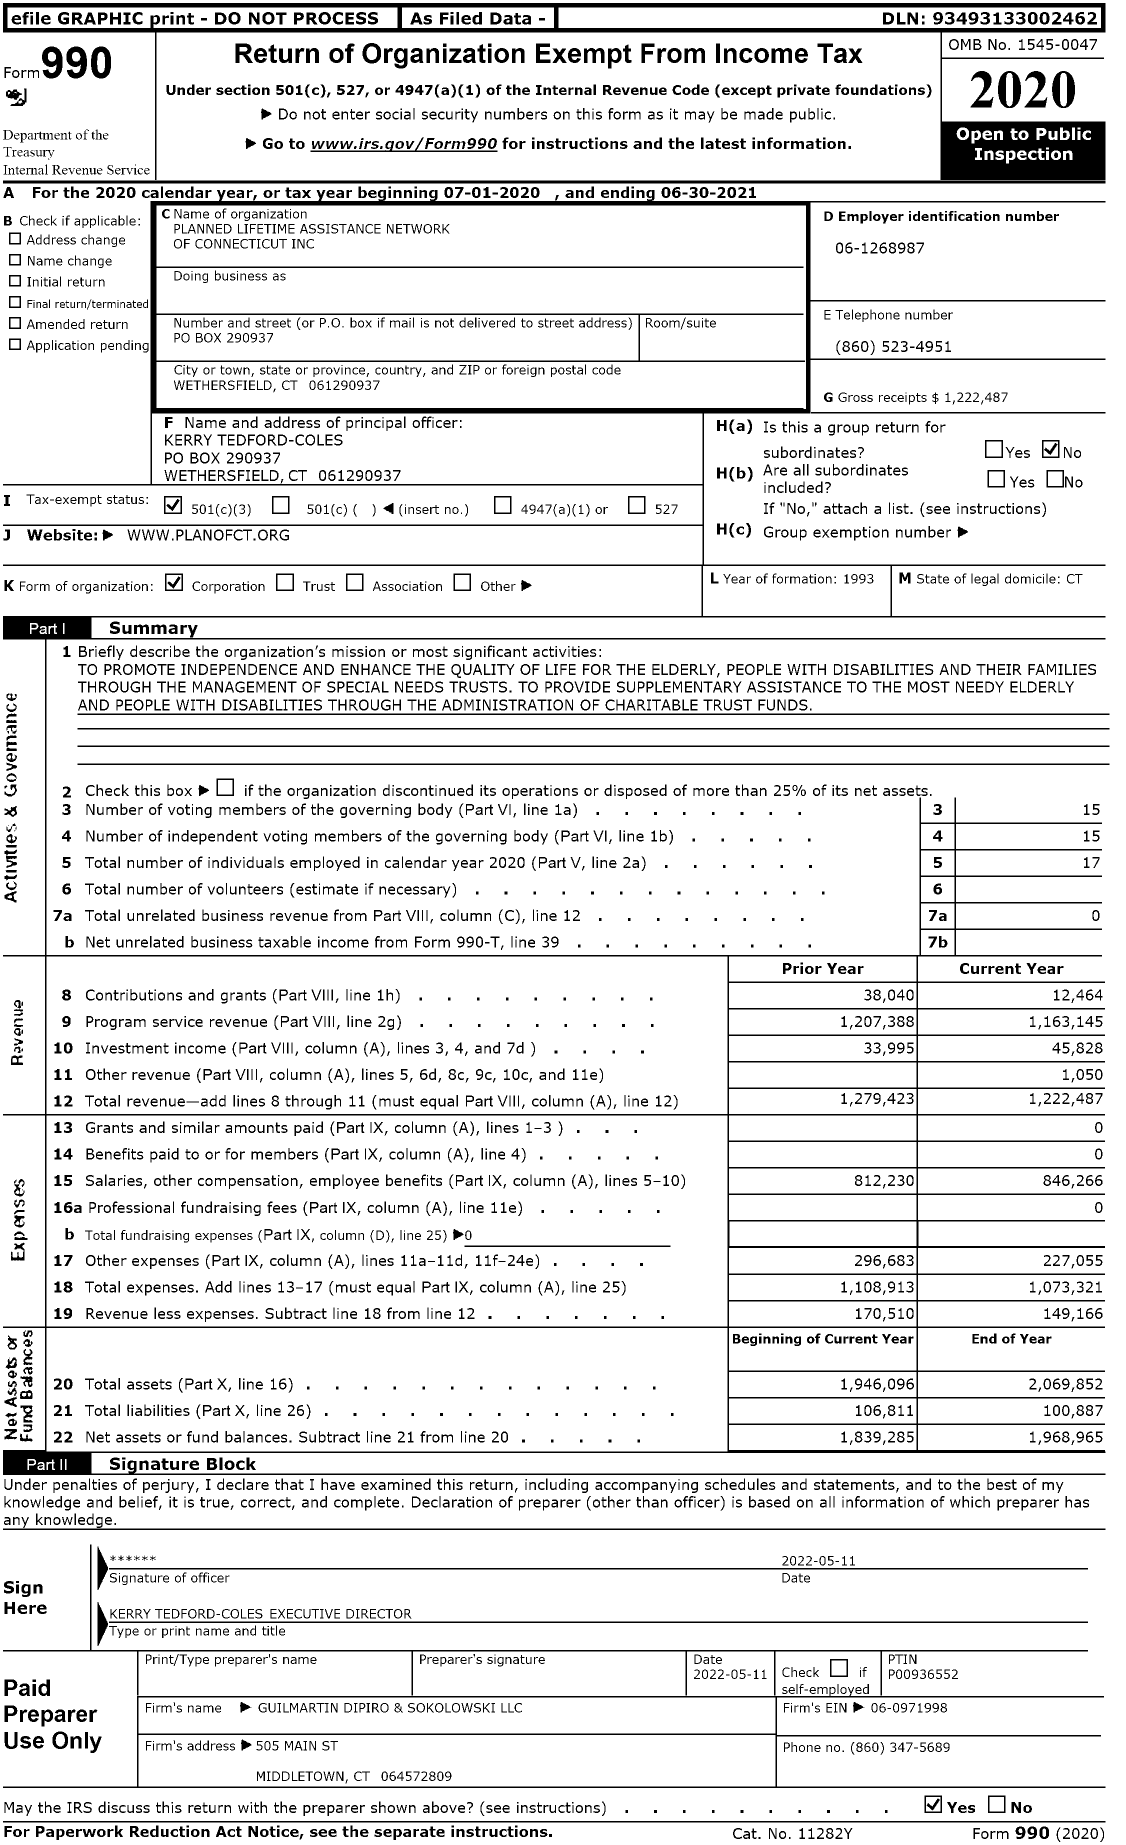 Image of first page of 2020 Form 990 for Planned Lifetime Assistance Network of Connecticut